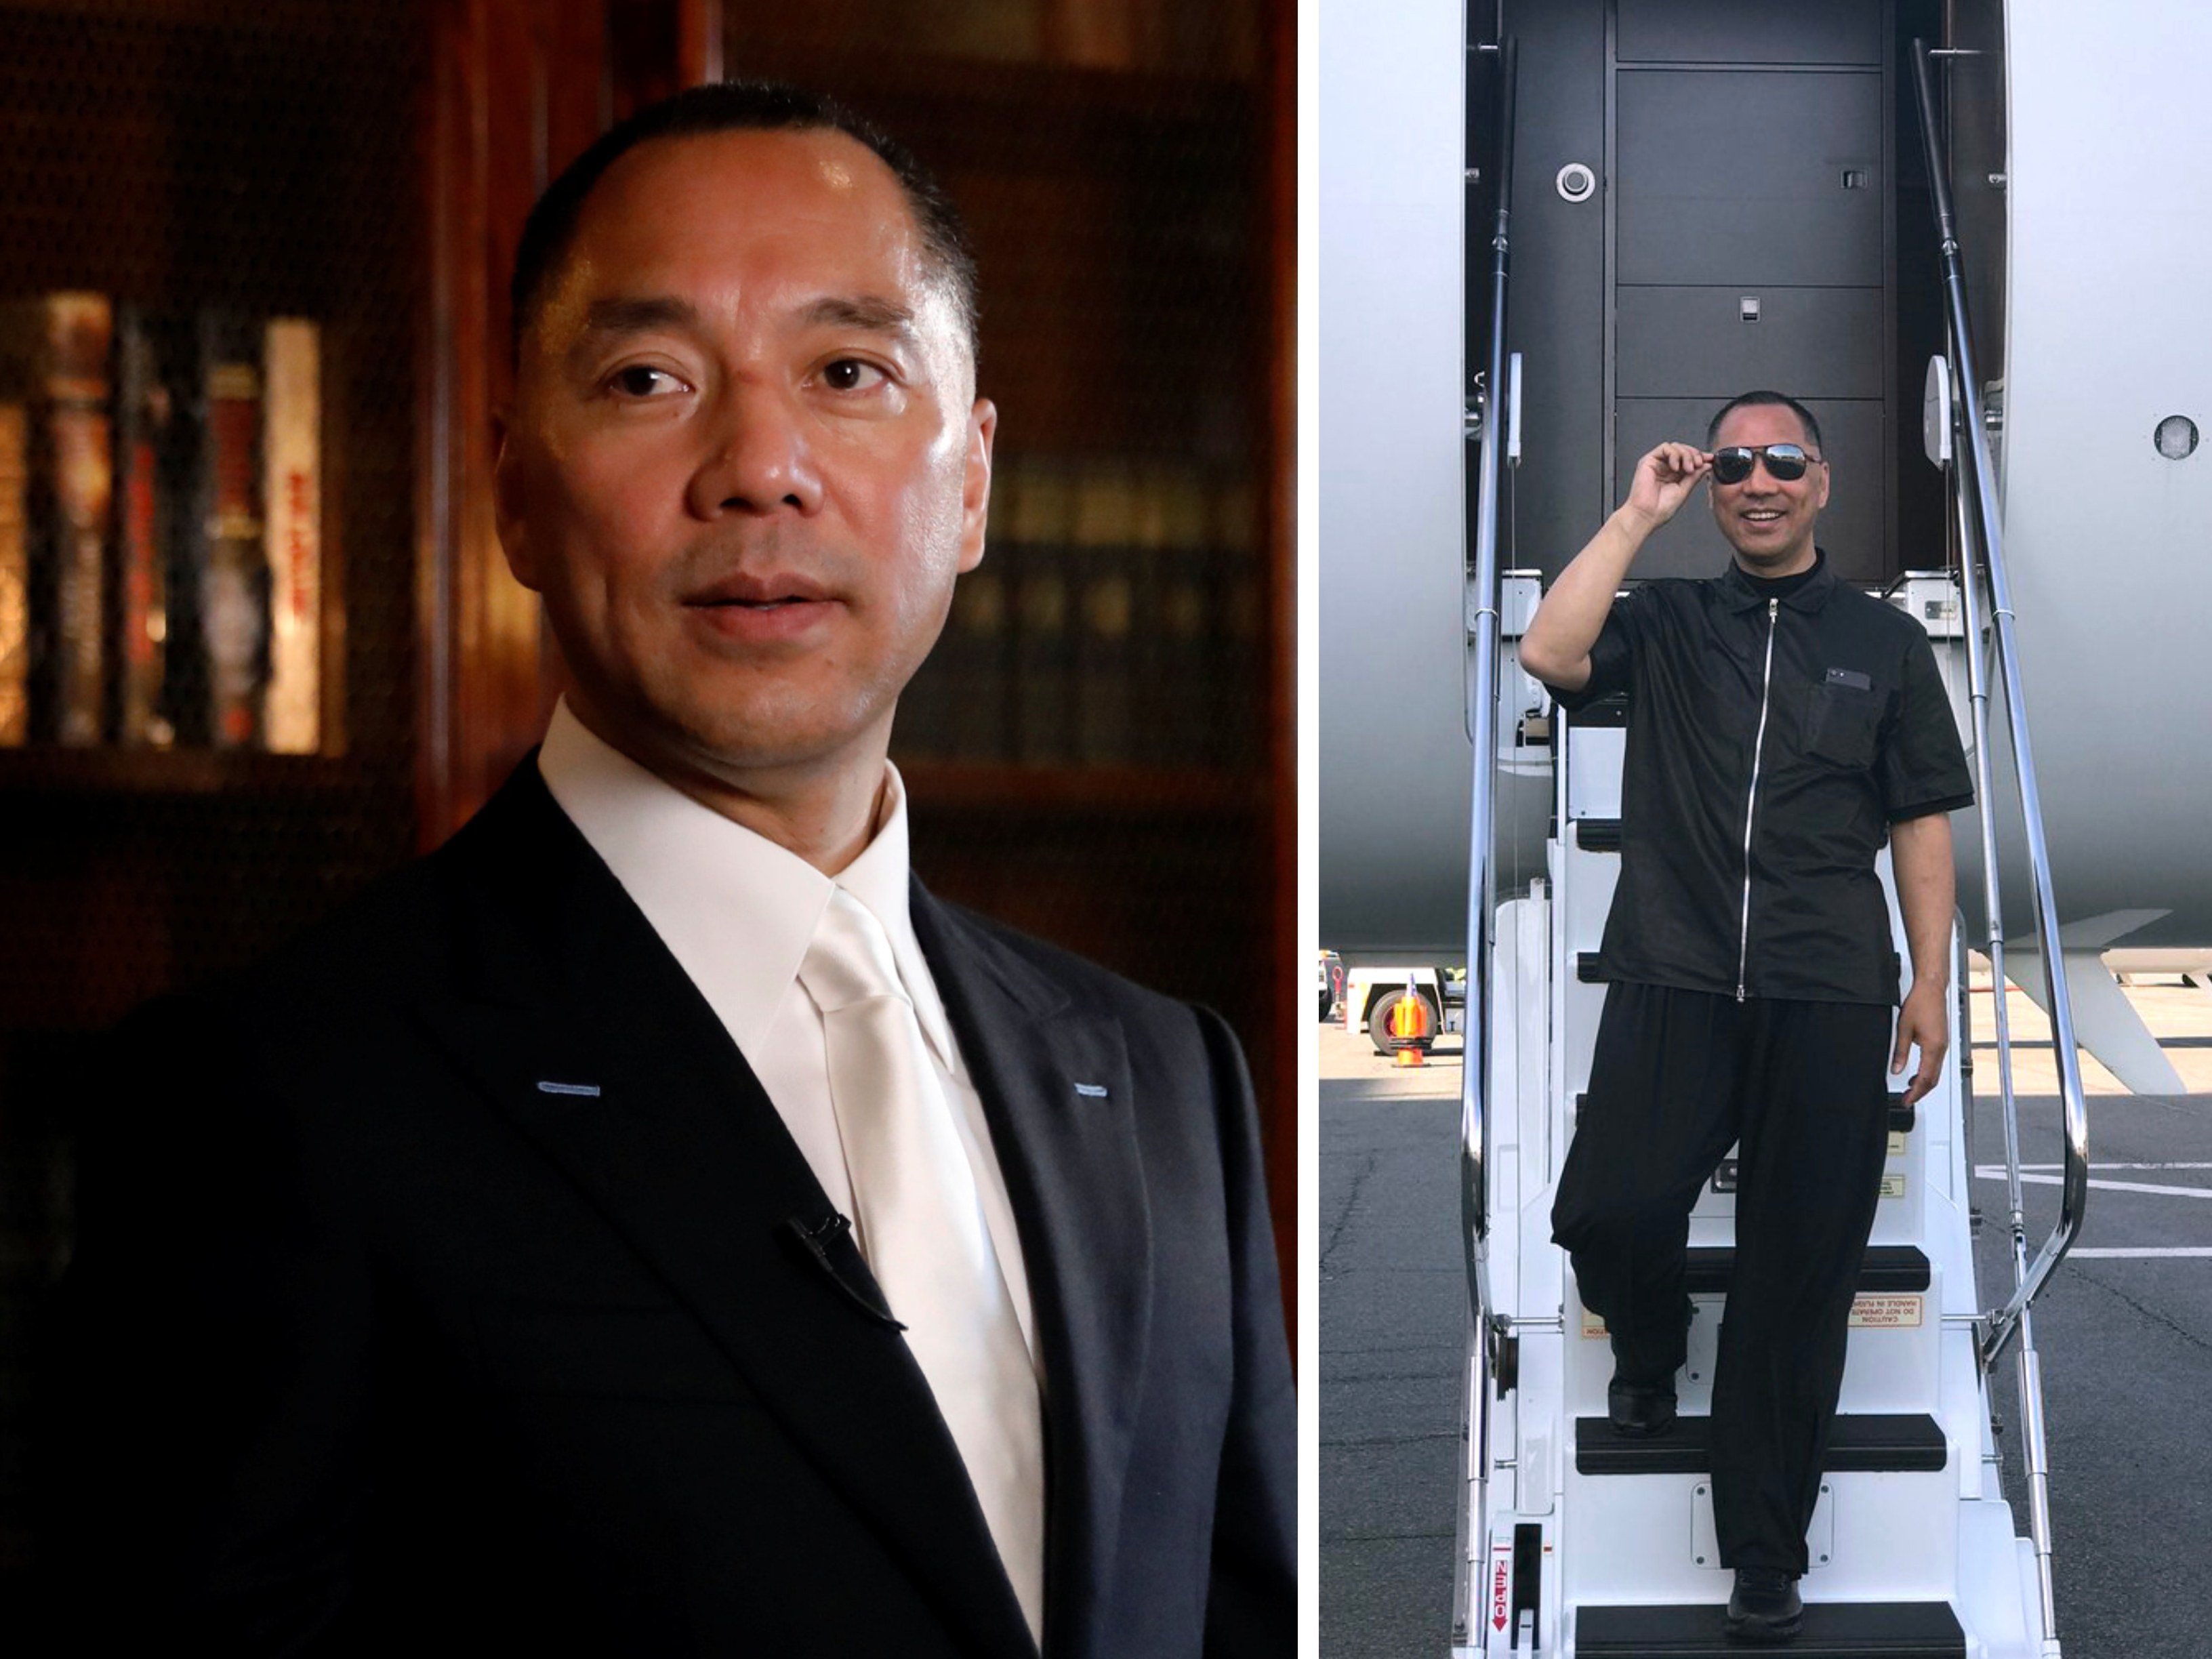 Guo Wengui was a billionaire in China before he fled the country and moved to the US. Photos: Handout; Reuters